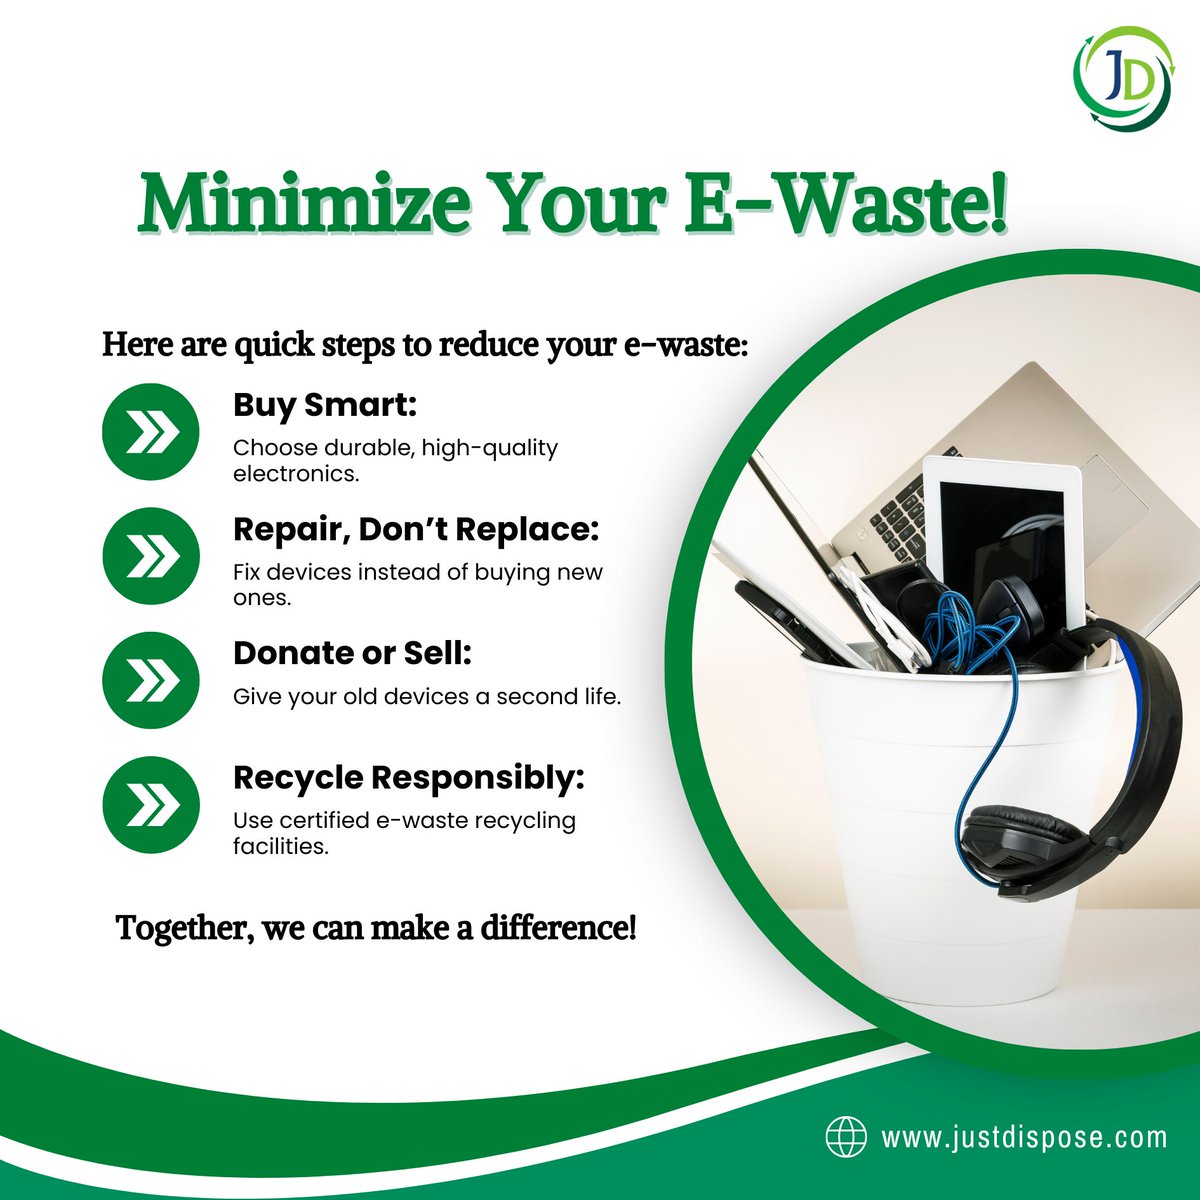 Minimize Your E-Waste! Follow these simple steps: buy durable electronics, repair instead of replace, donate or sell old devices, and recycle responsibly.
Visit justdispose.com

#ewaste #recycling #electronicwaste #simplifyingdisposal #sustainable #future #ewasterecycling